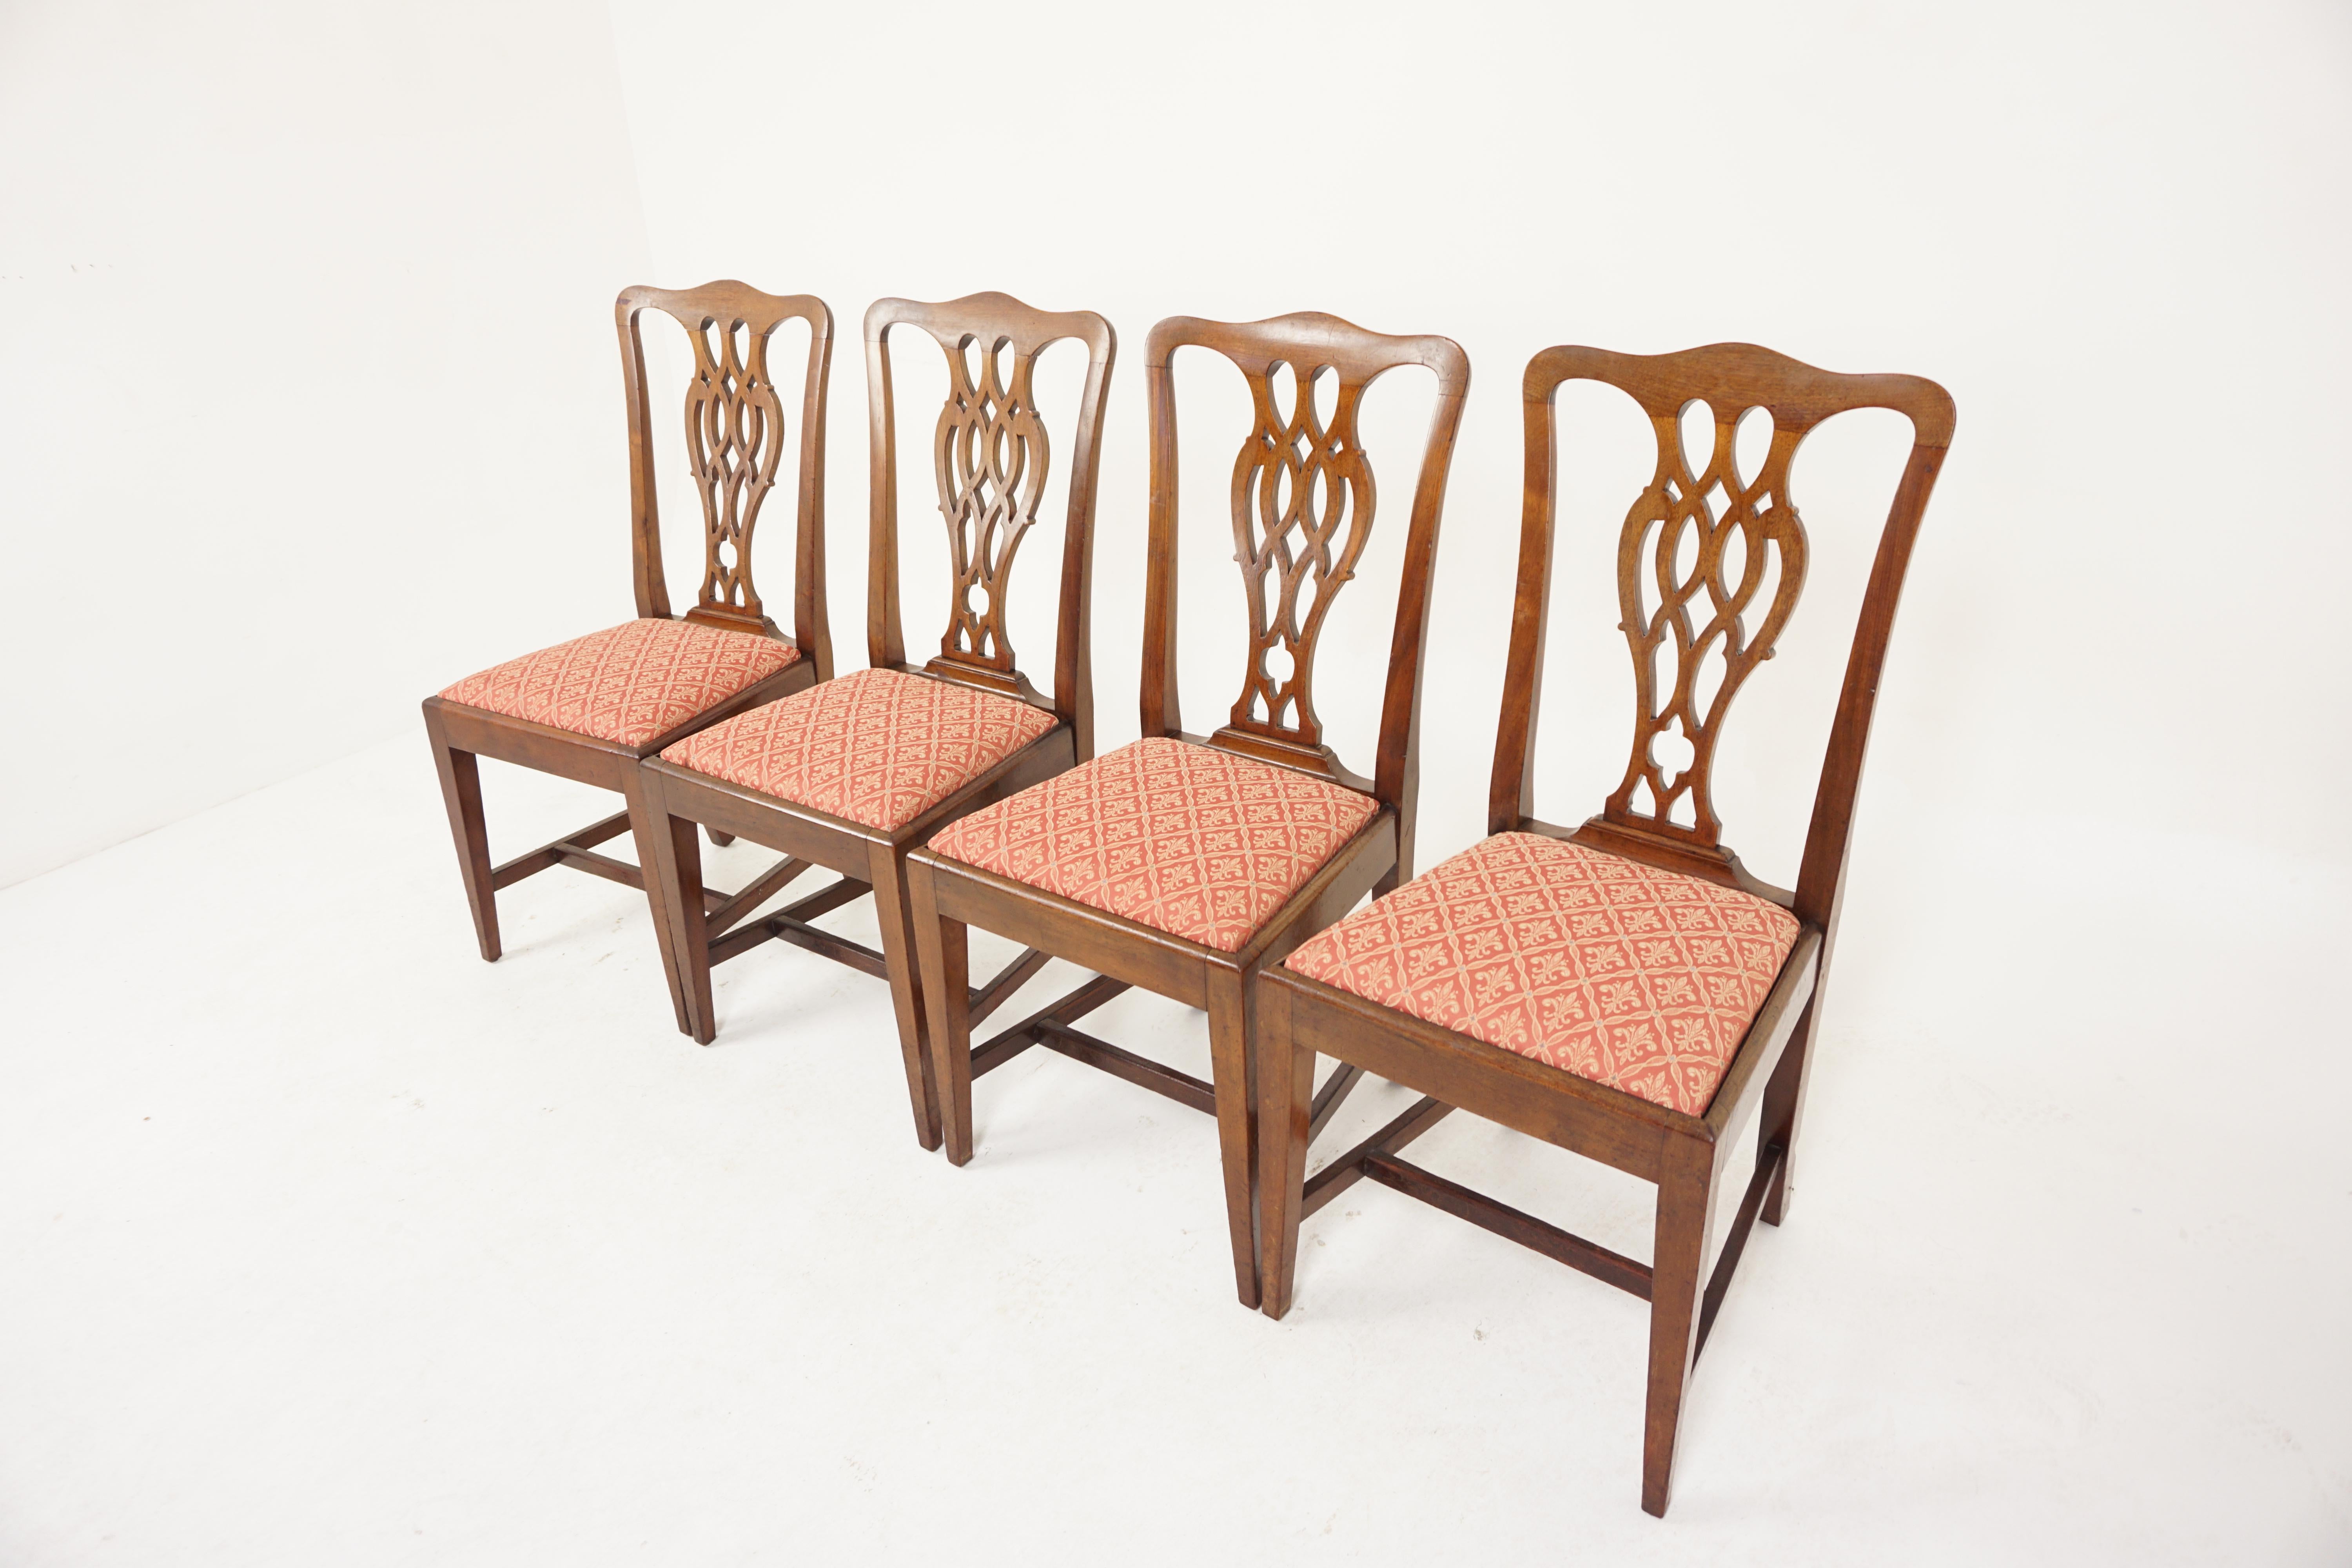 Set of four quality Chippendale style walnut dining chairs, Scotland 1920, H759

Scotland 1920
Solid walnut
Original finish

Shaped top with a pierced back splat
With large comfortable drop upholstered seats
All standing on square tapered